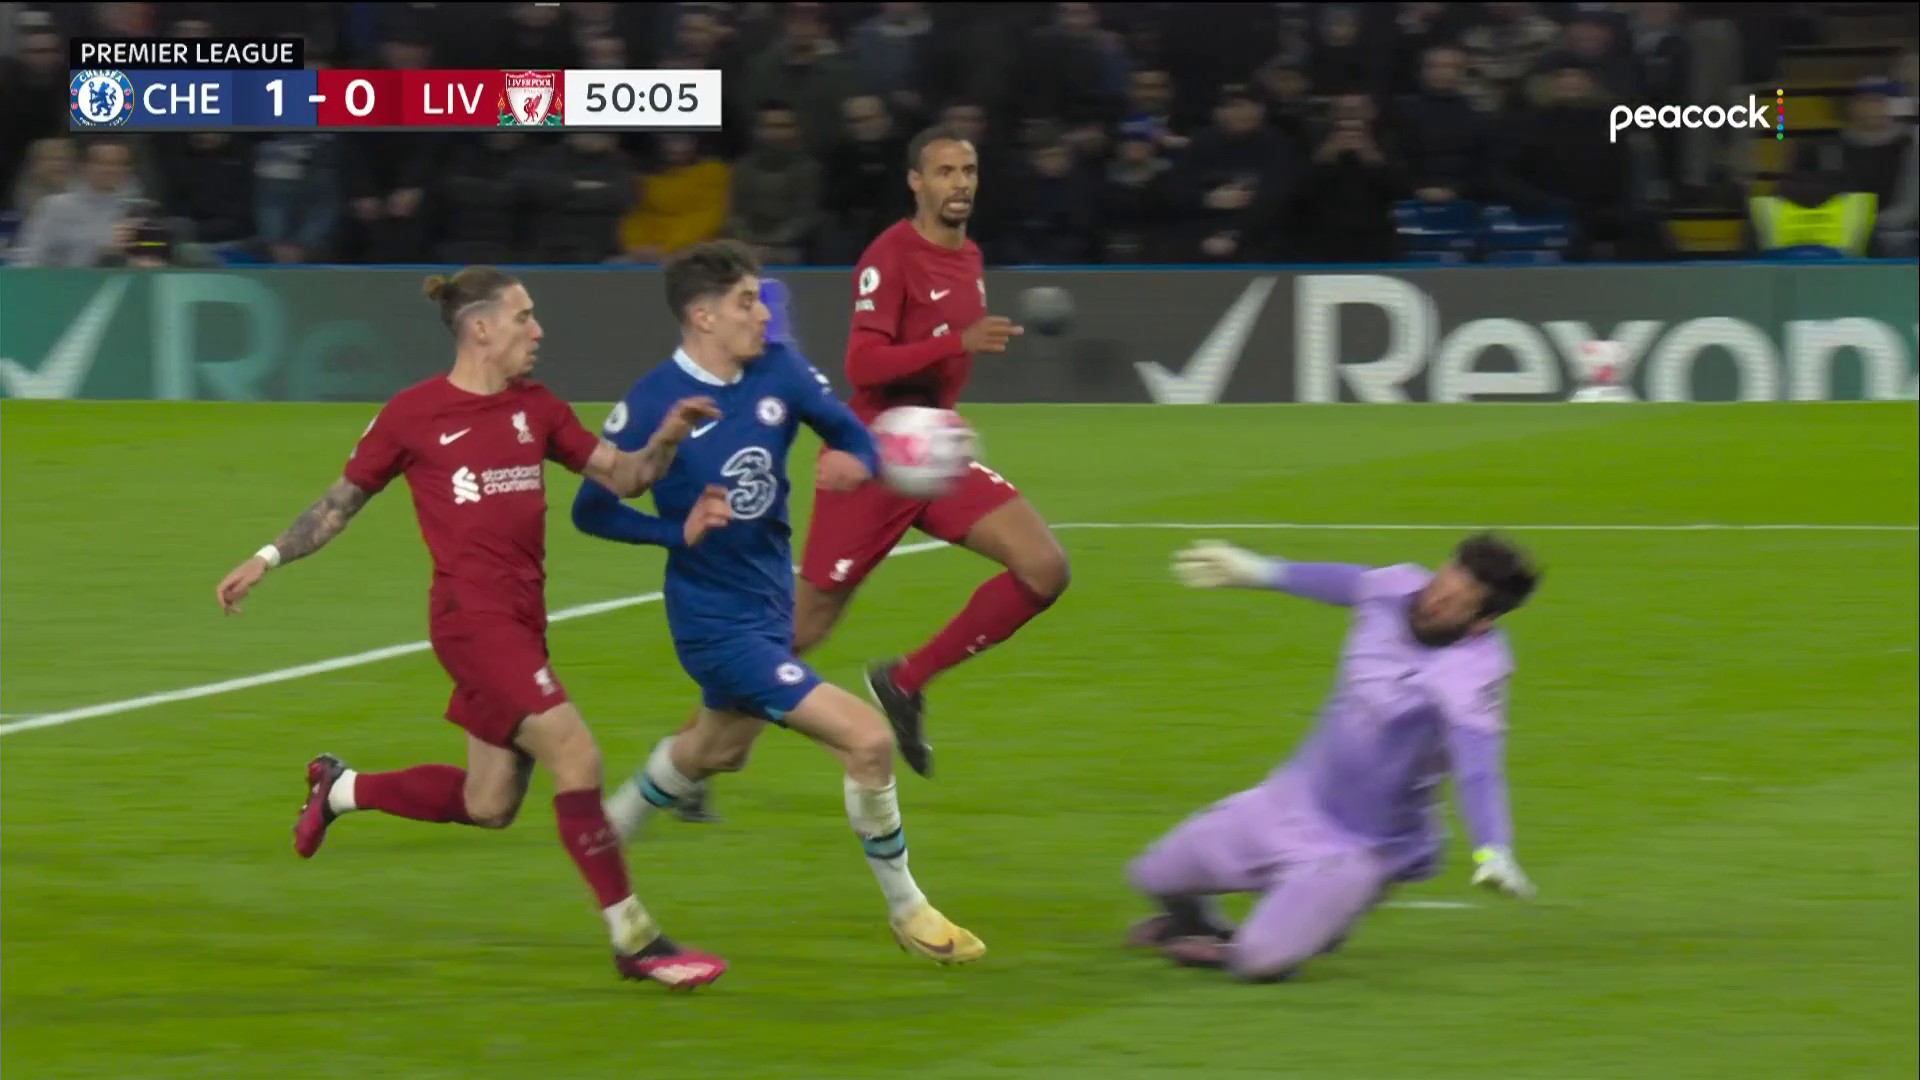 Chelsea have the ball in the back of the net again BUT this time it's disallowed due to a handball.

📺: @peacock 
#MyPLMorning | #CHELIV”